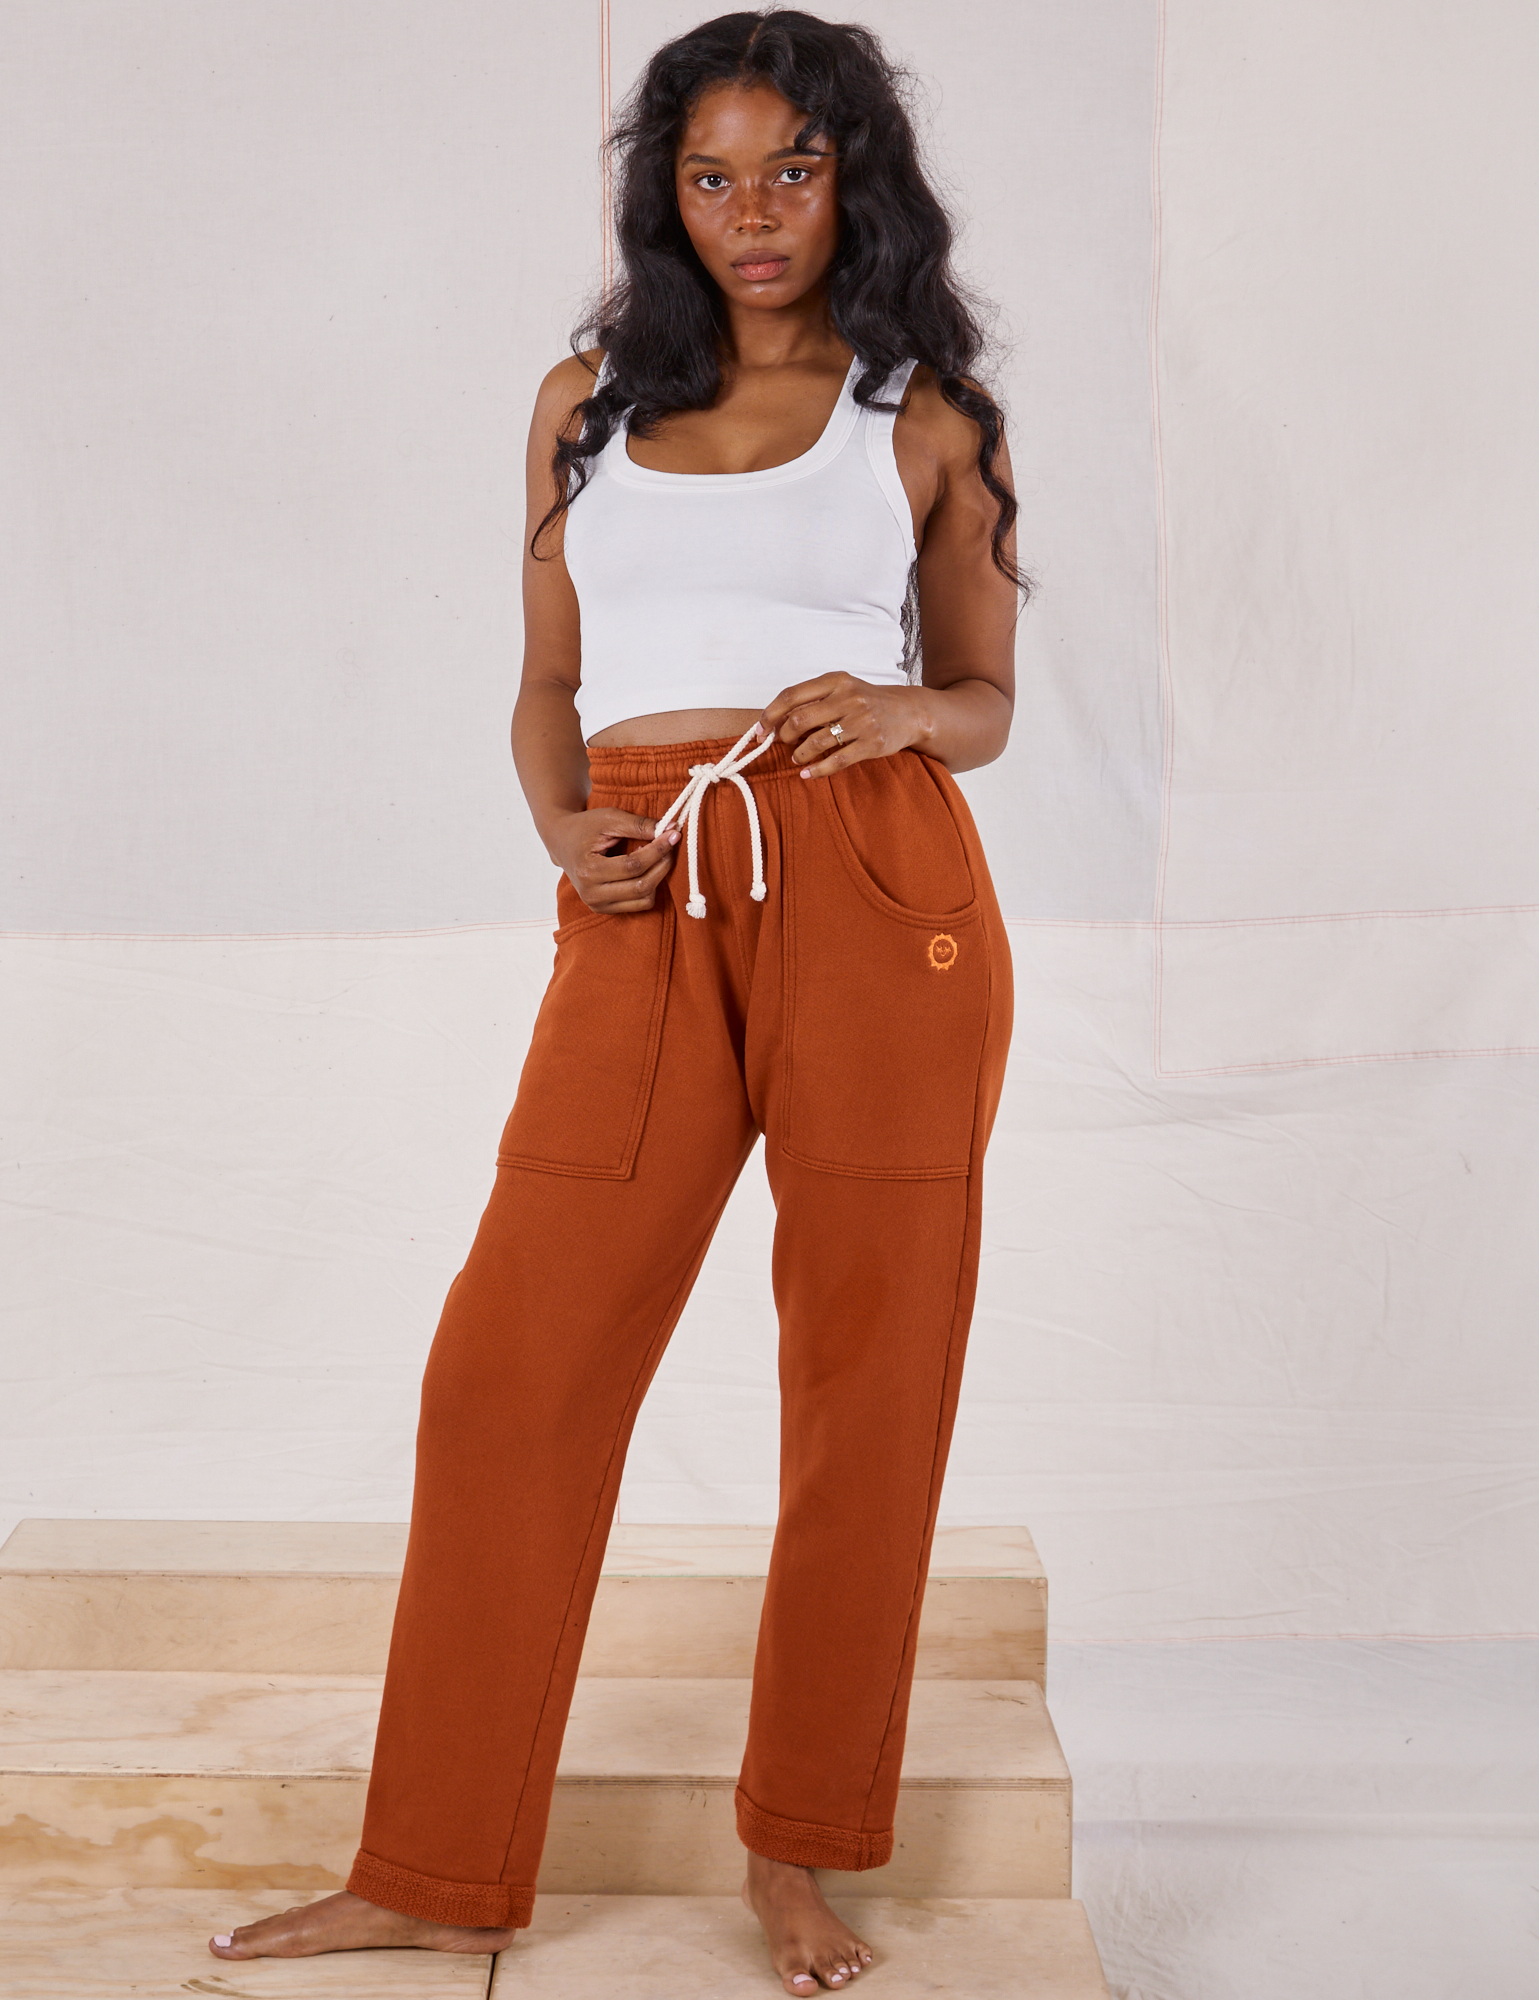 Kandia is 5&#39;3&quot; and wearing P Rolled Cuff Sweat Pants in Burnt Terracotta paired with Cropped Tank in vintage tee off-white